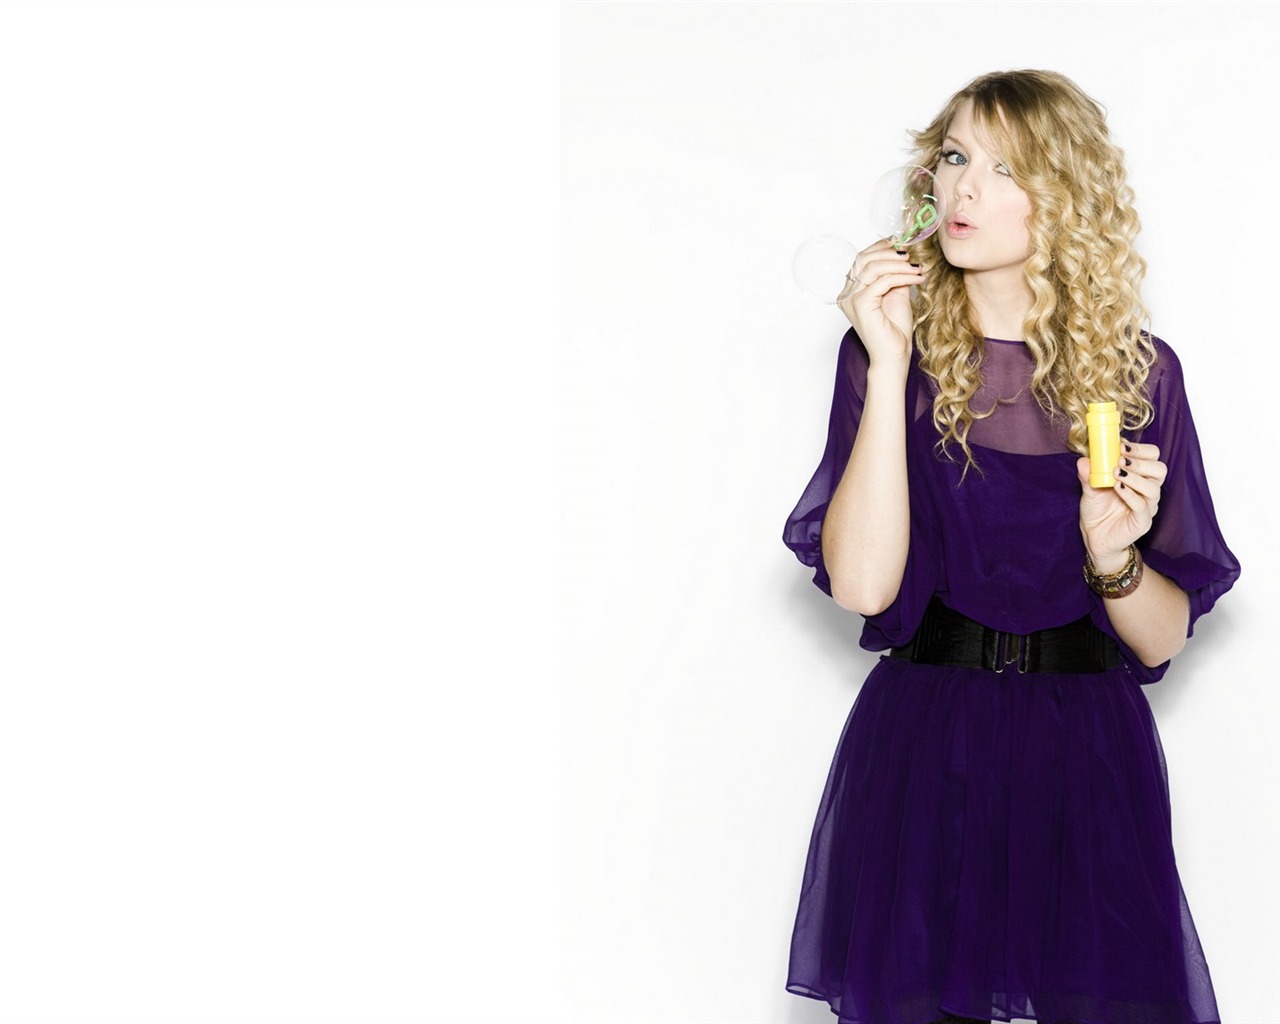 Taylor Swift #016 - 1280x1024 Wallpapers Pictures Photos Images